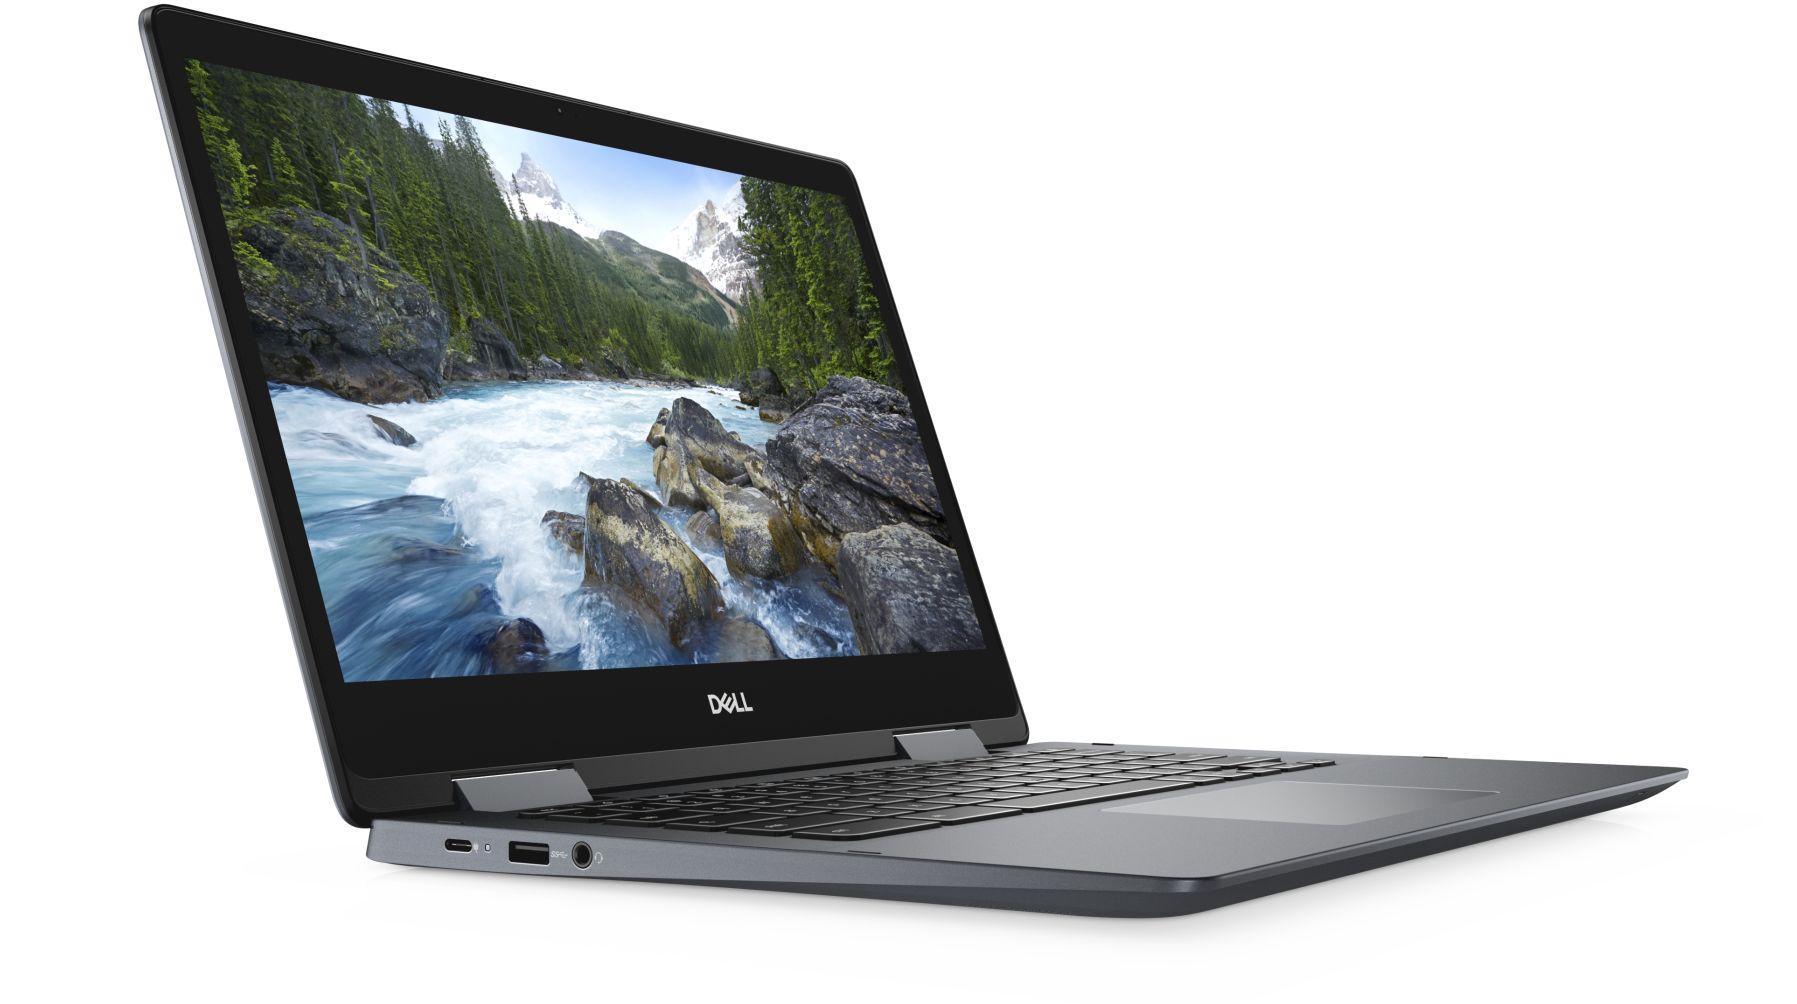 Dell will launch a high-end 2-in-1 Chromebook with 15 hours of battery life